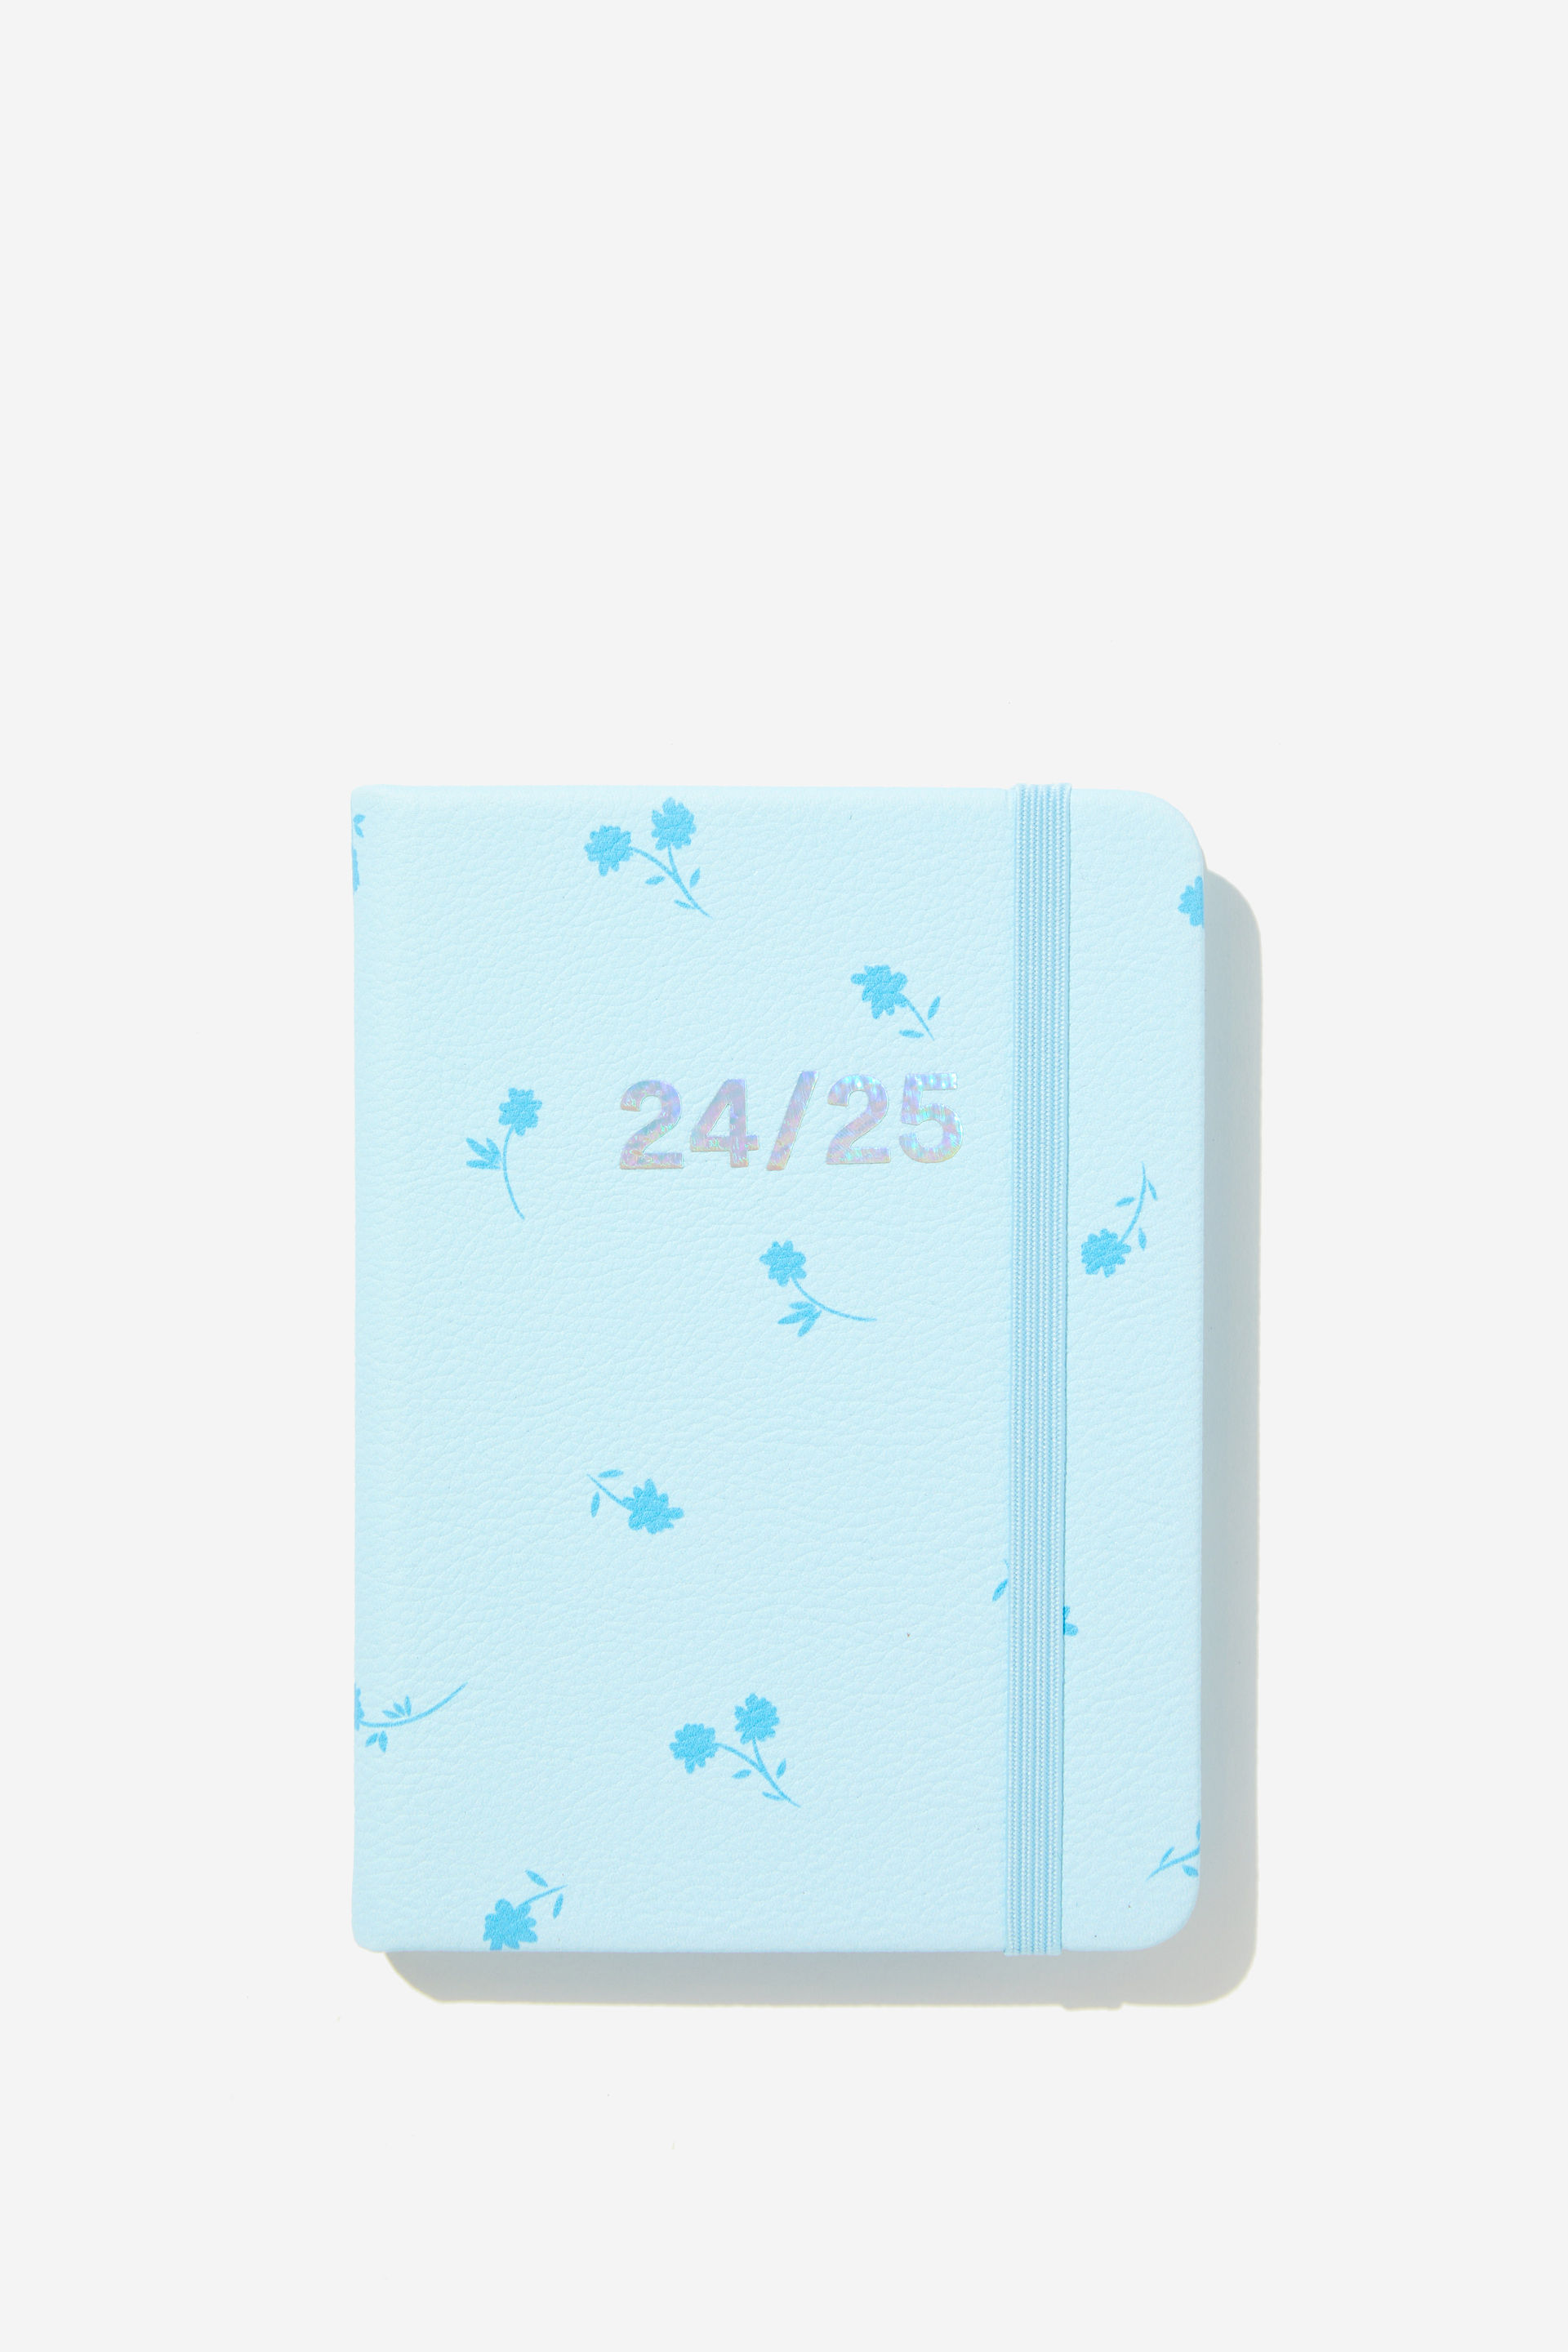 Typo - 2024 25 A6 Weekly Buffalo Diary - Arctic blue ditsy floral